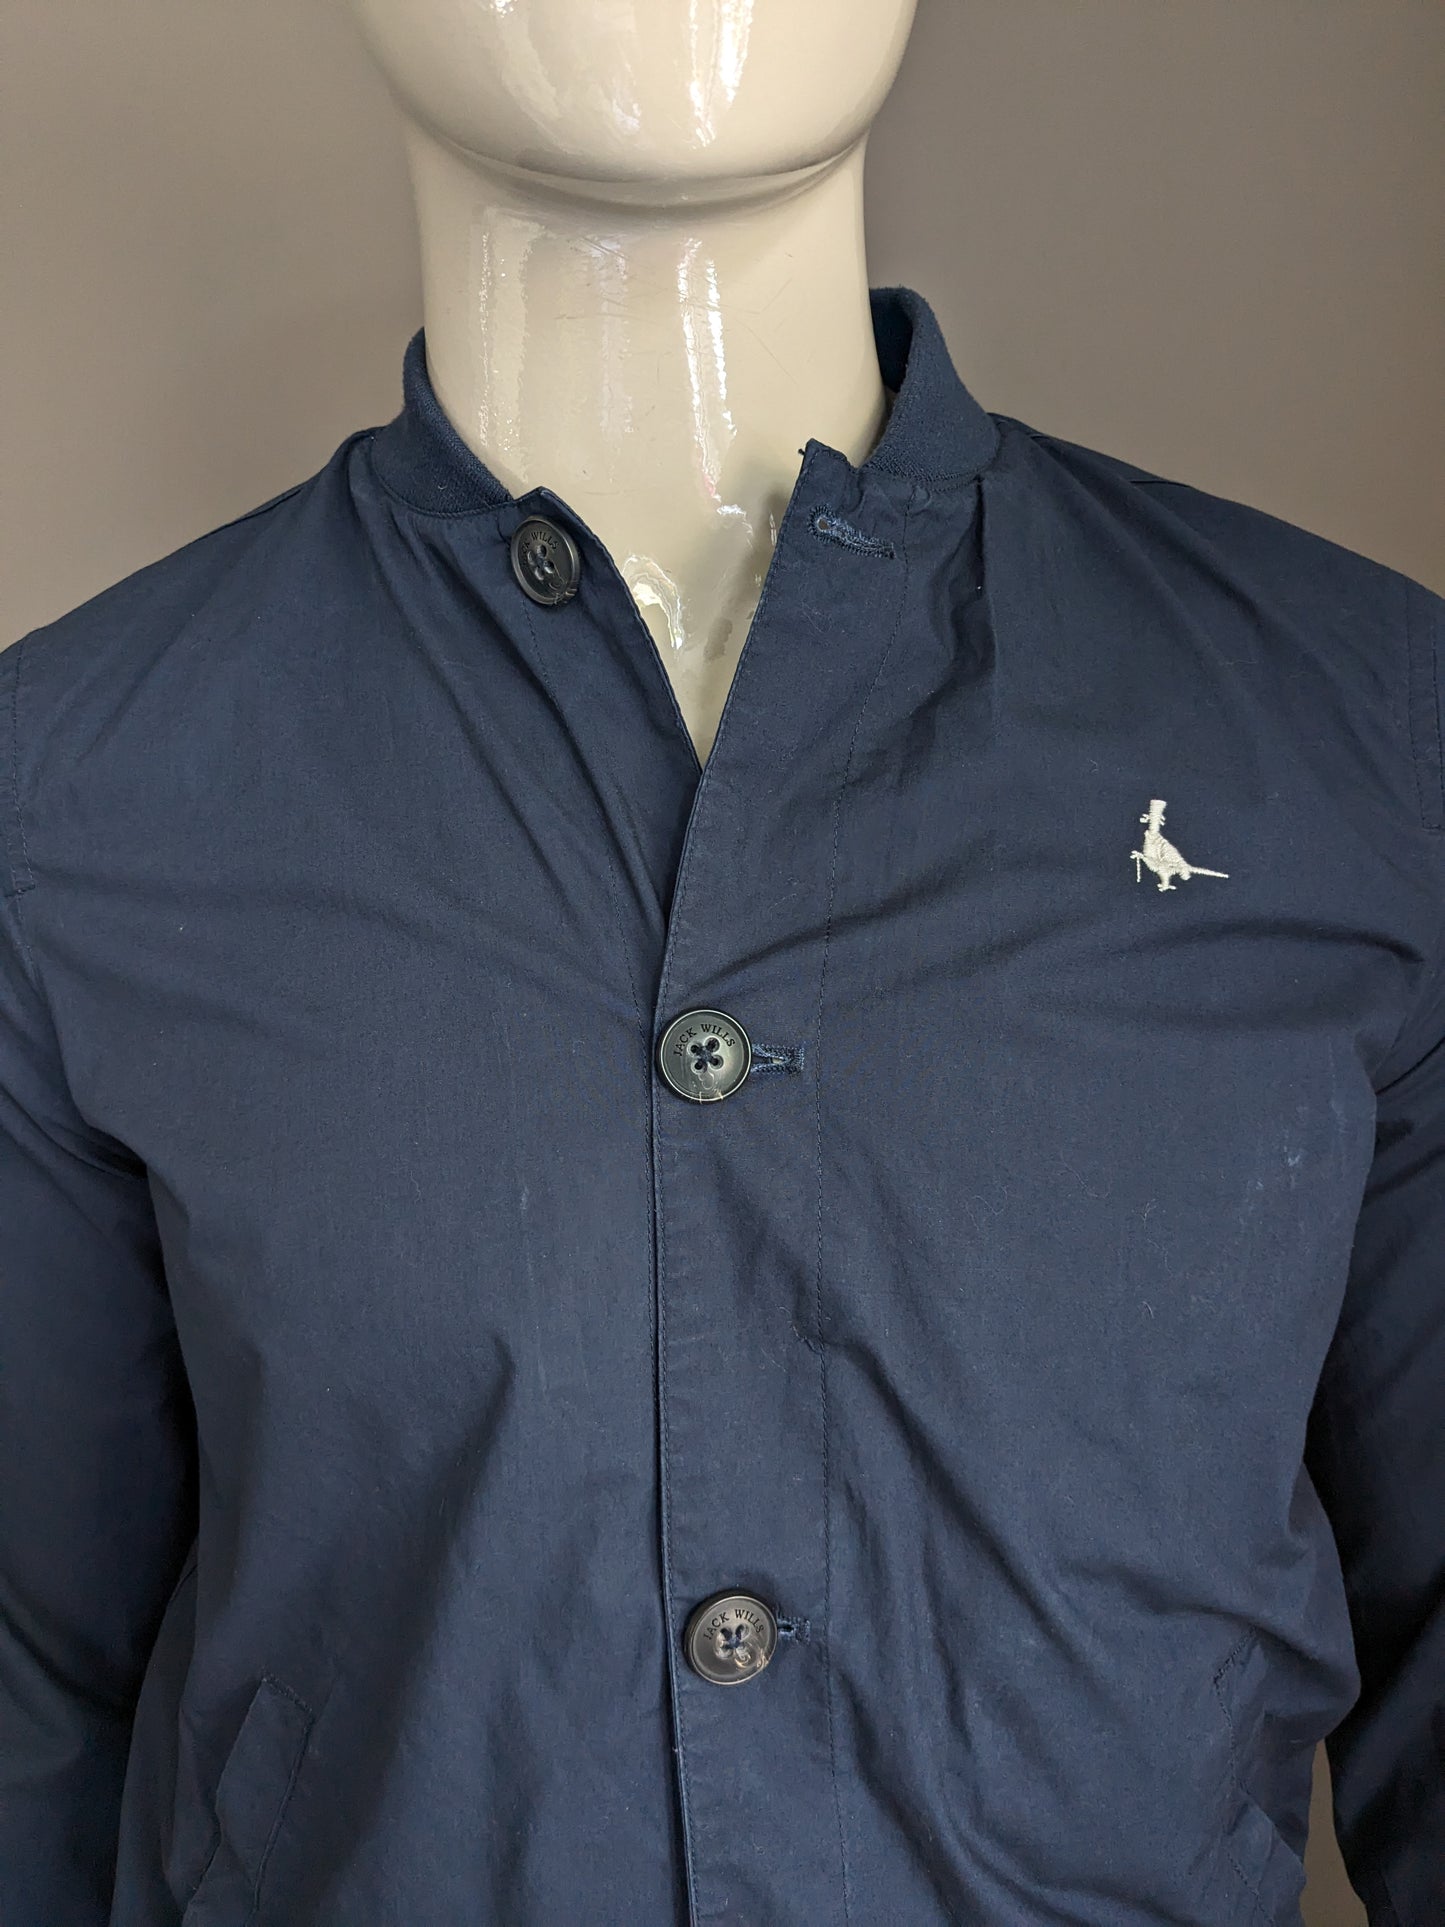 Jack Wills Summer Jacket / Jack with buttons. Dark blue colored. Size XS.